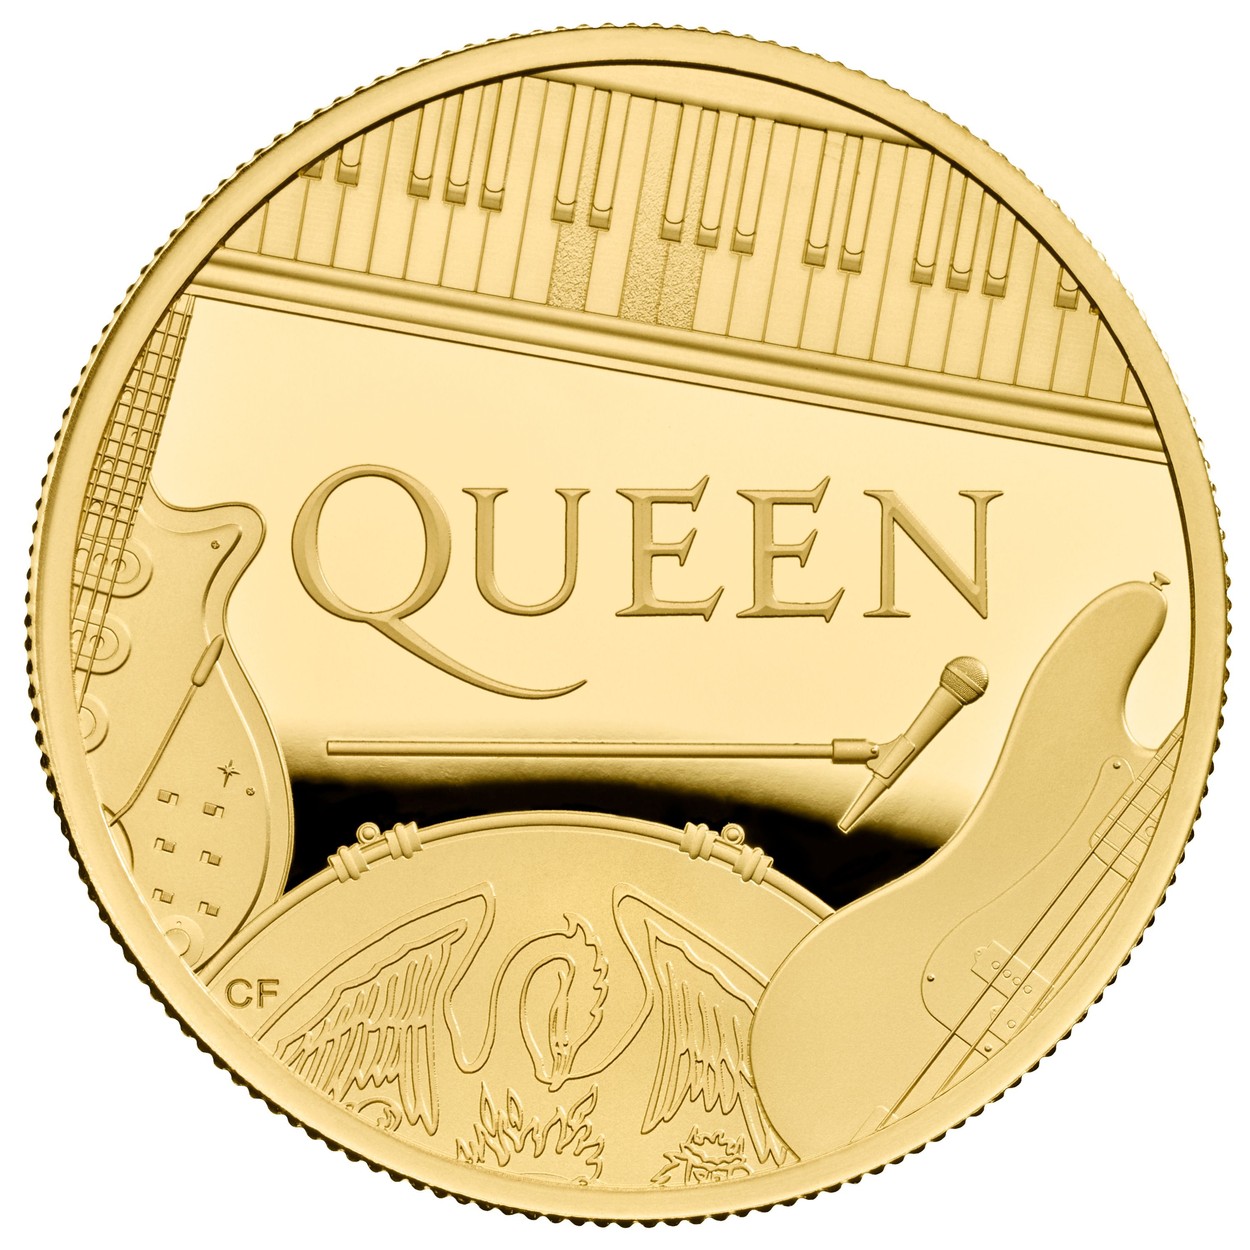 Rockers Queen have teamed up with the Royal Mint to release a series of commemorative coins.
The legendary band join Queen Elizabeth II on the set, released to celebrate the group and their lasting legacy, as the start of a series of Music Legends.
The coins detail the instruments of all four members of the band, including the Bechstein piano played by Freddie Mercury at the top of the coin.
Brian May, guitarist for the band, posed with the coins and said: Here we have the first-ever Queen and Queen coin.